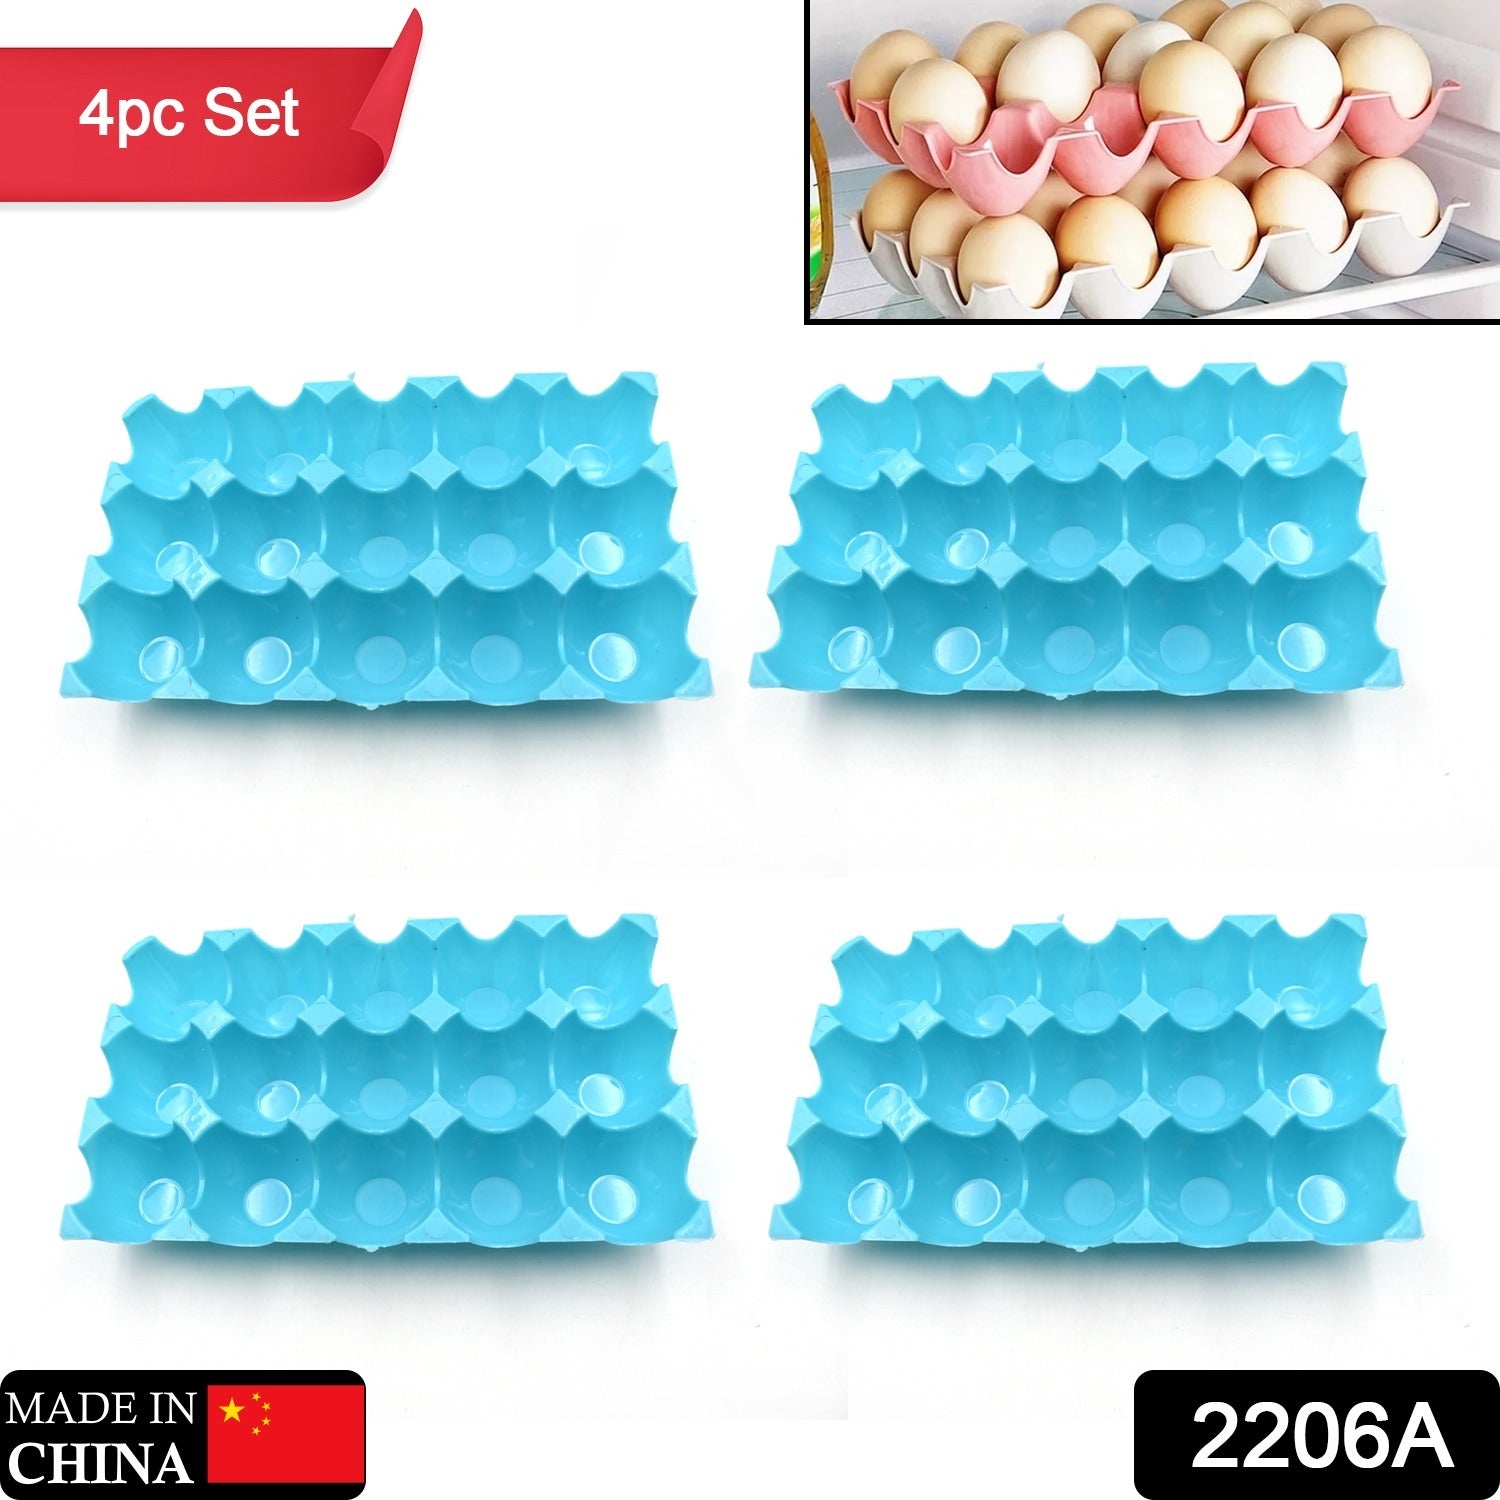 2206a 15 Cavity Plastic Egg Tray Egg Trays for Storage with 15 Eggs Holder (4 Pc Set)